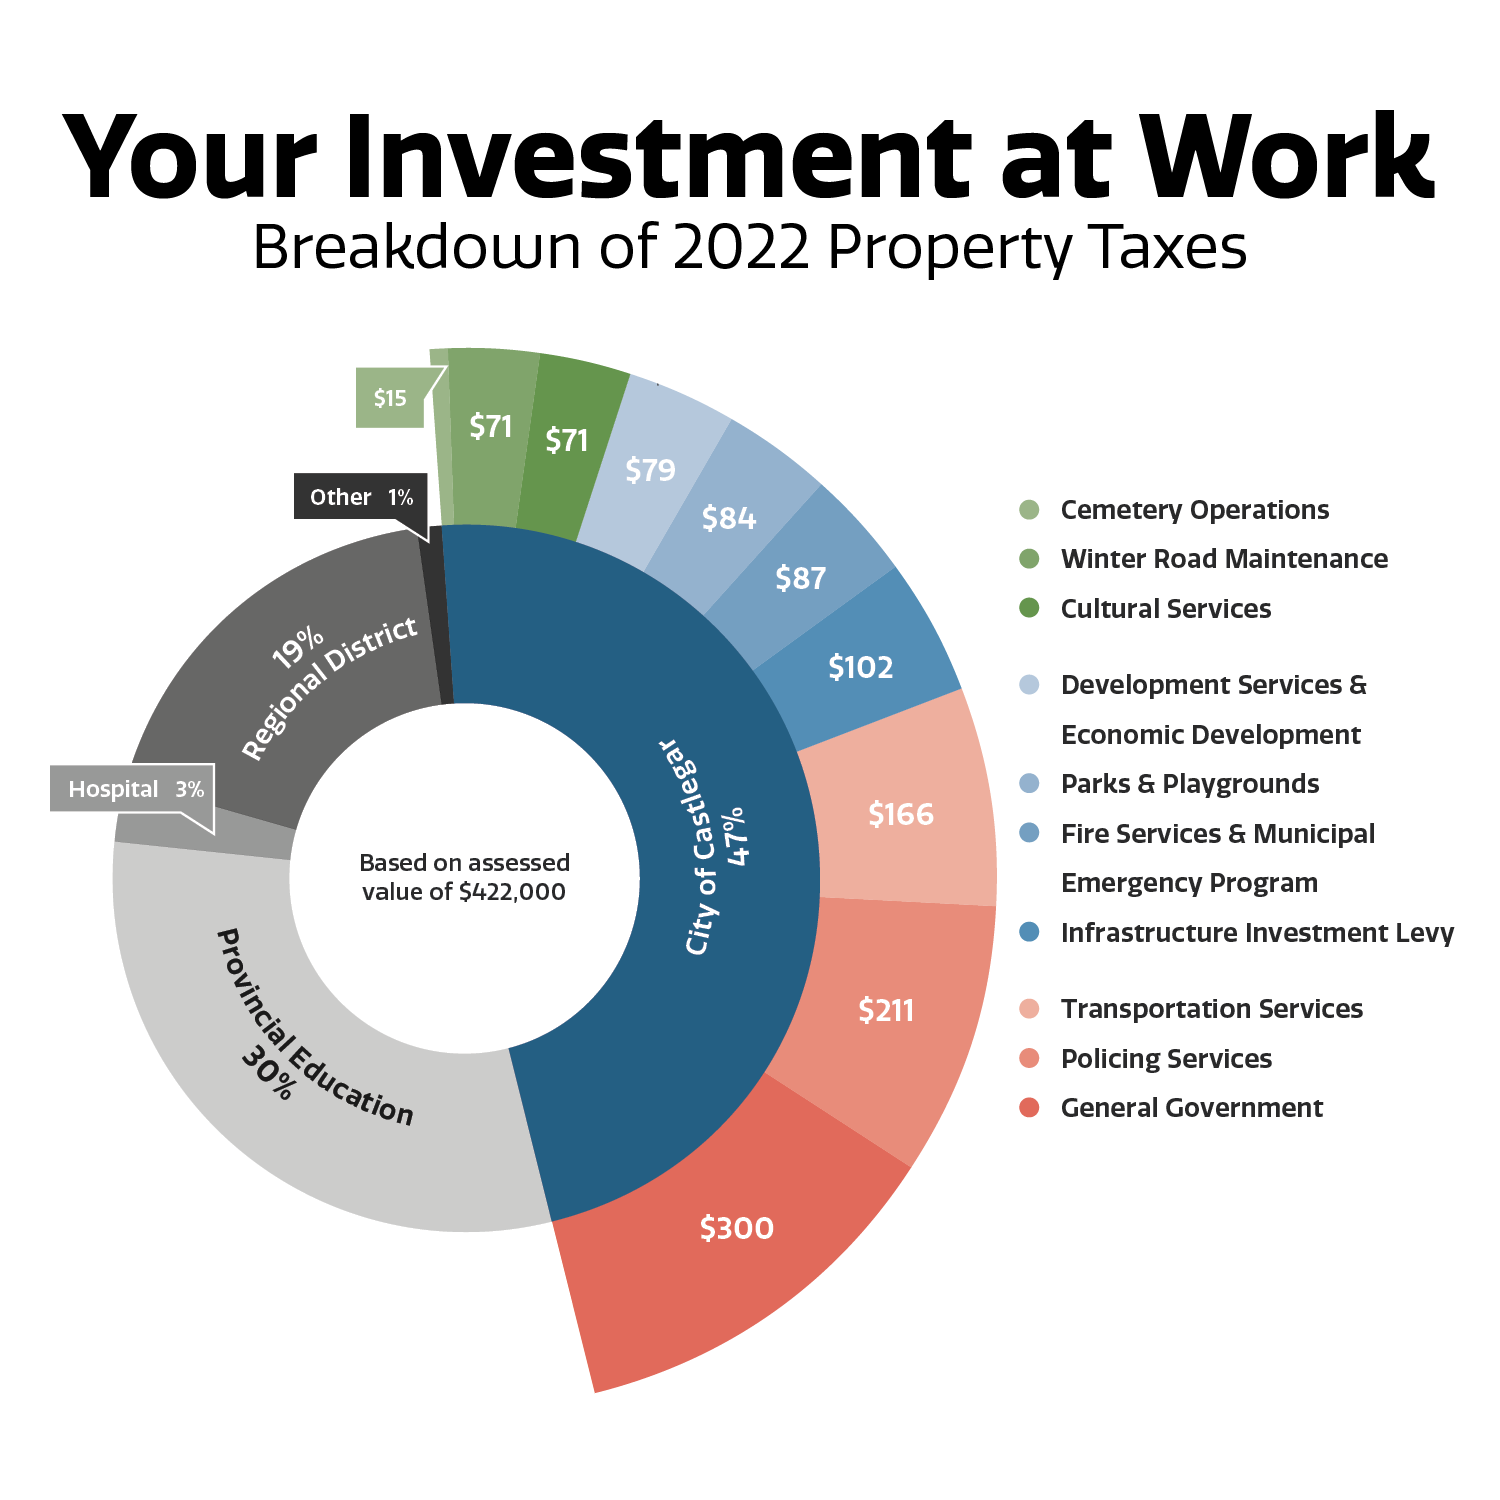 City of Castlegar Property Taxes due July 4, 2022